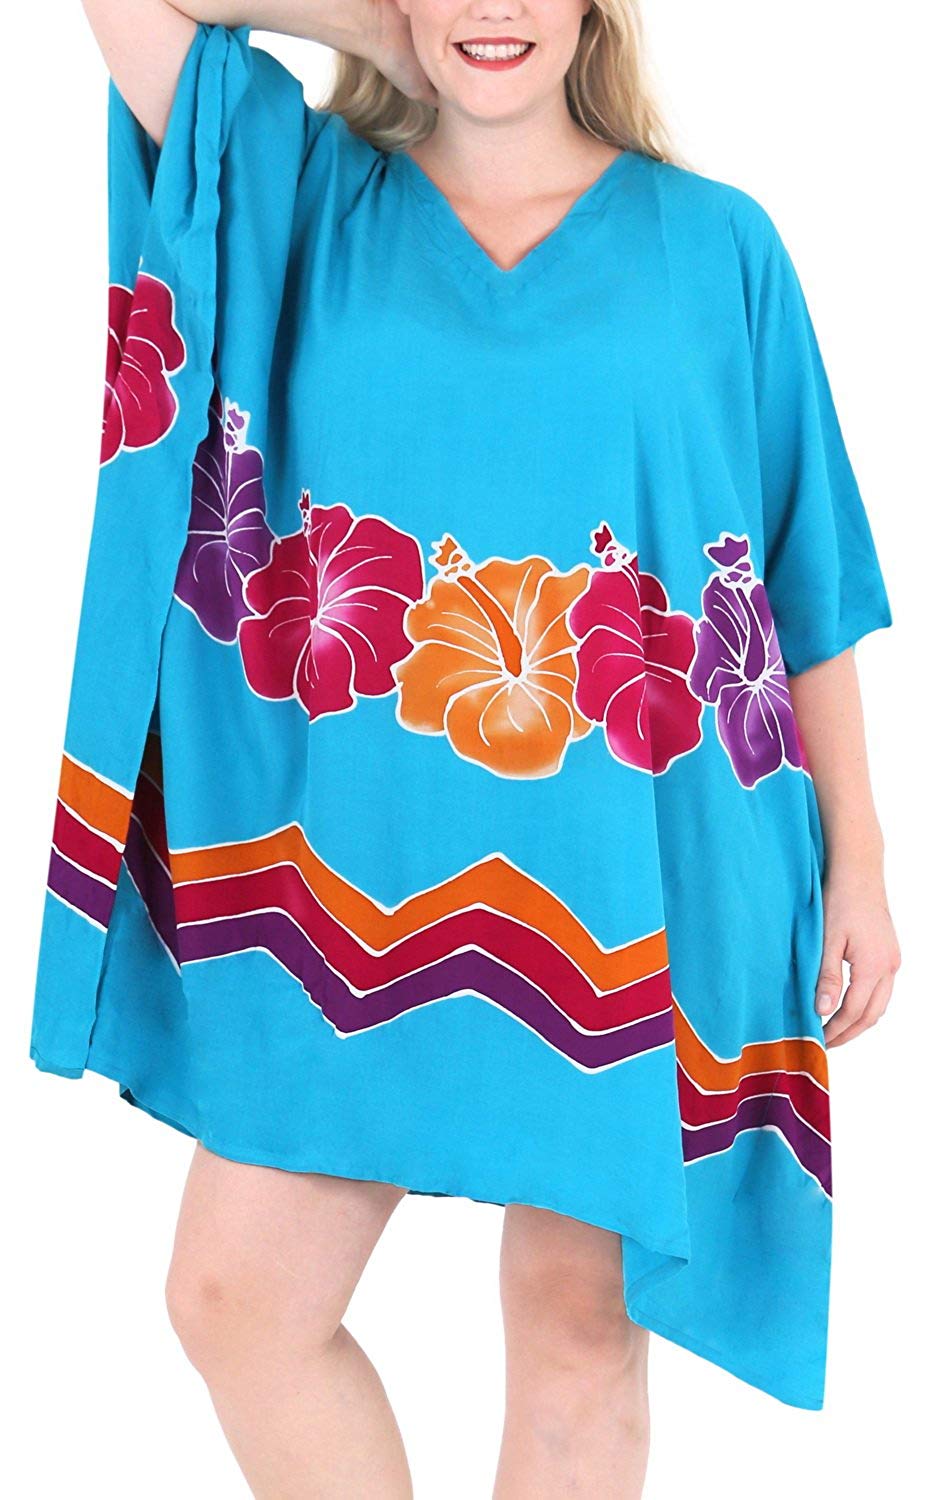 Women's Beachwear Evening Plus Size Blouse Loose Cover ups Casuals Turquoise